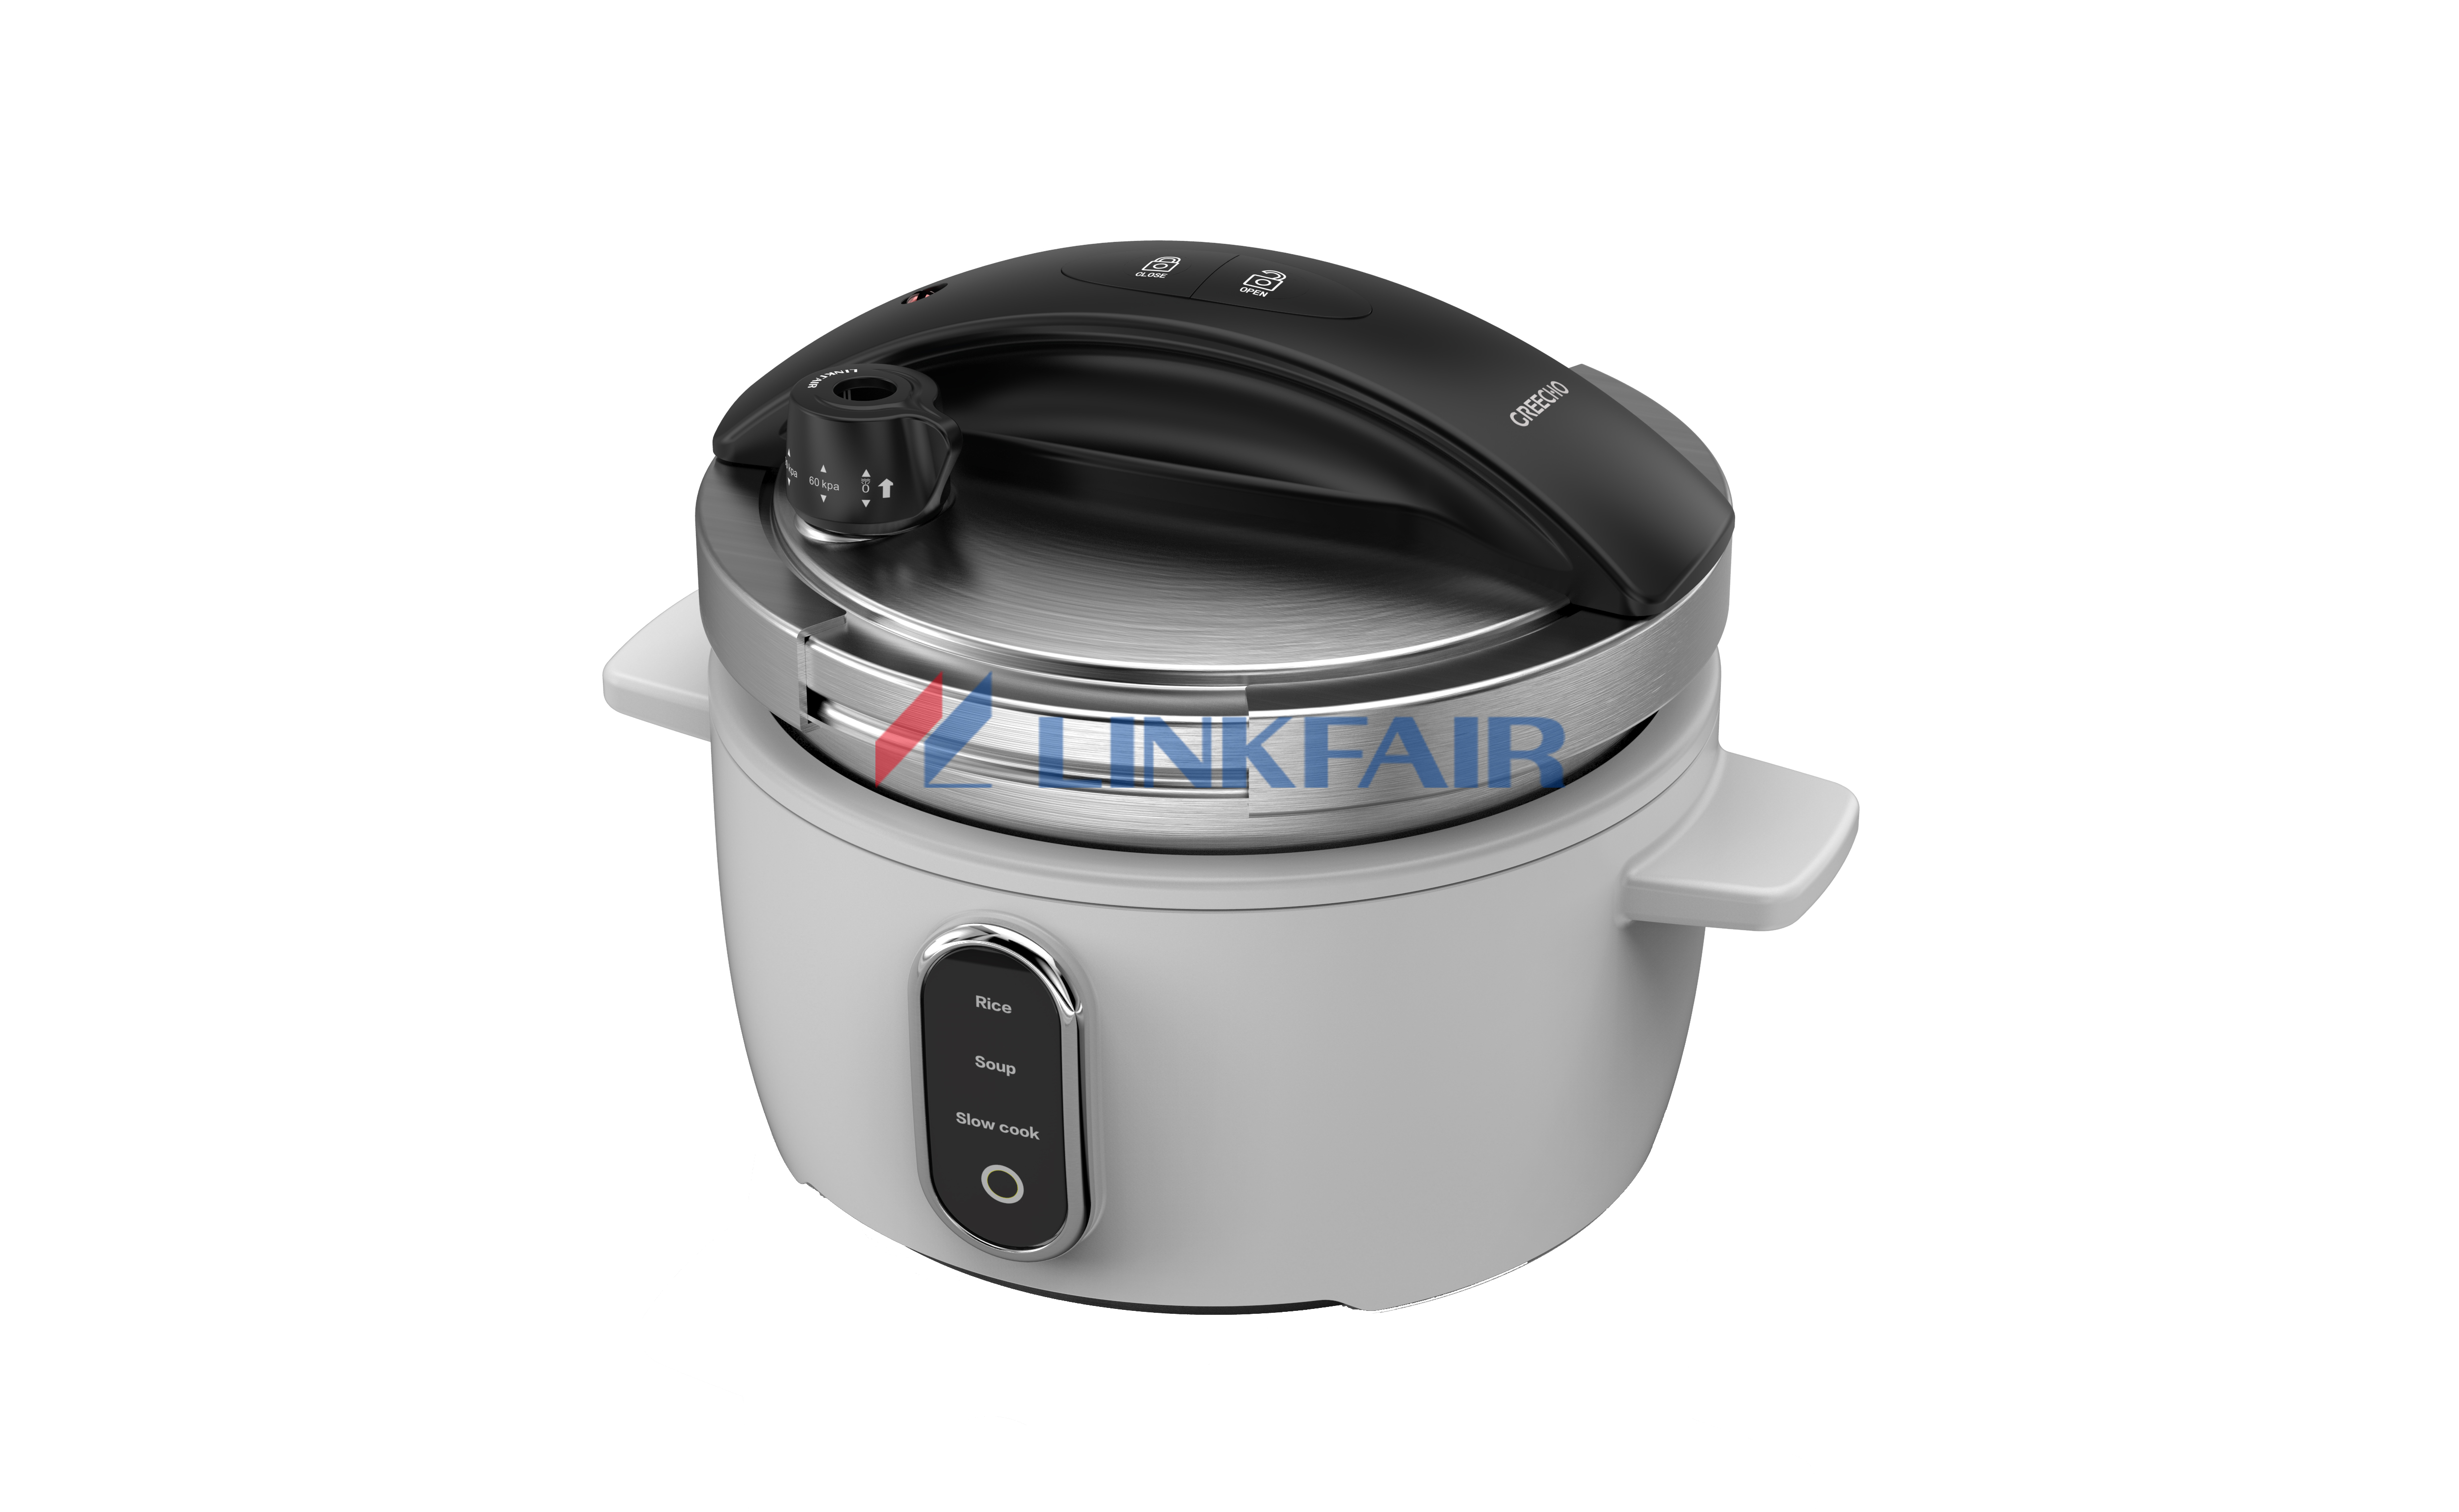 Improving Culinary Efficiency with Wireless Pressure Cookers